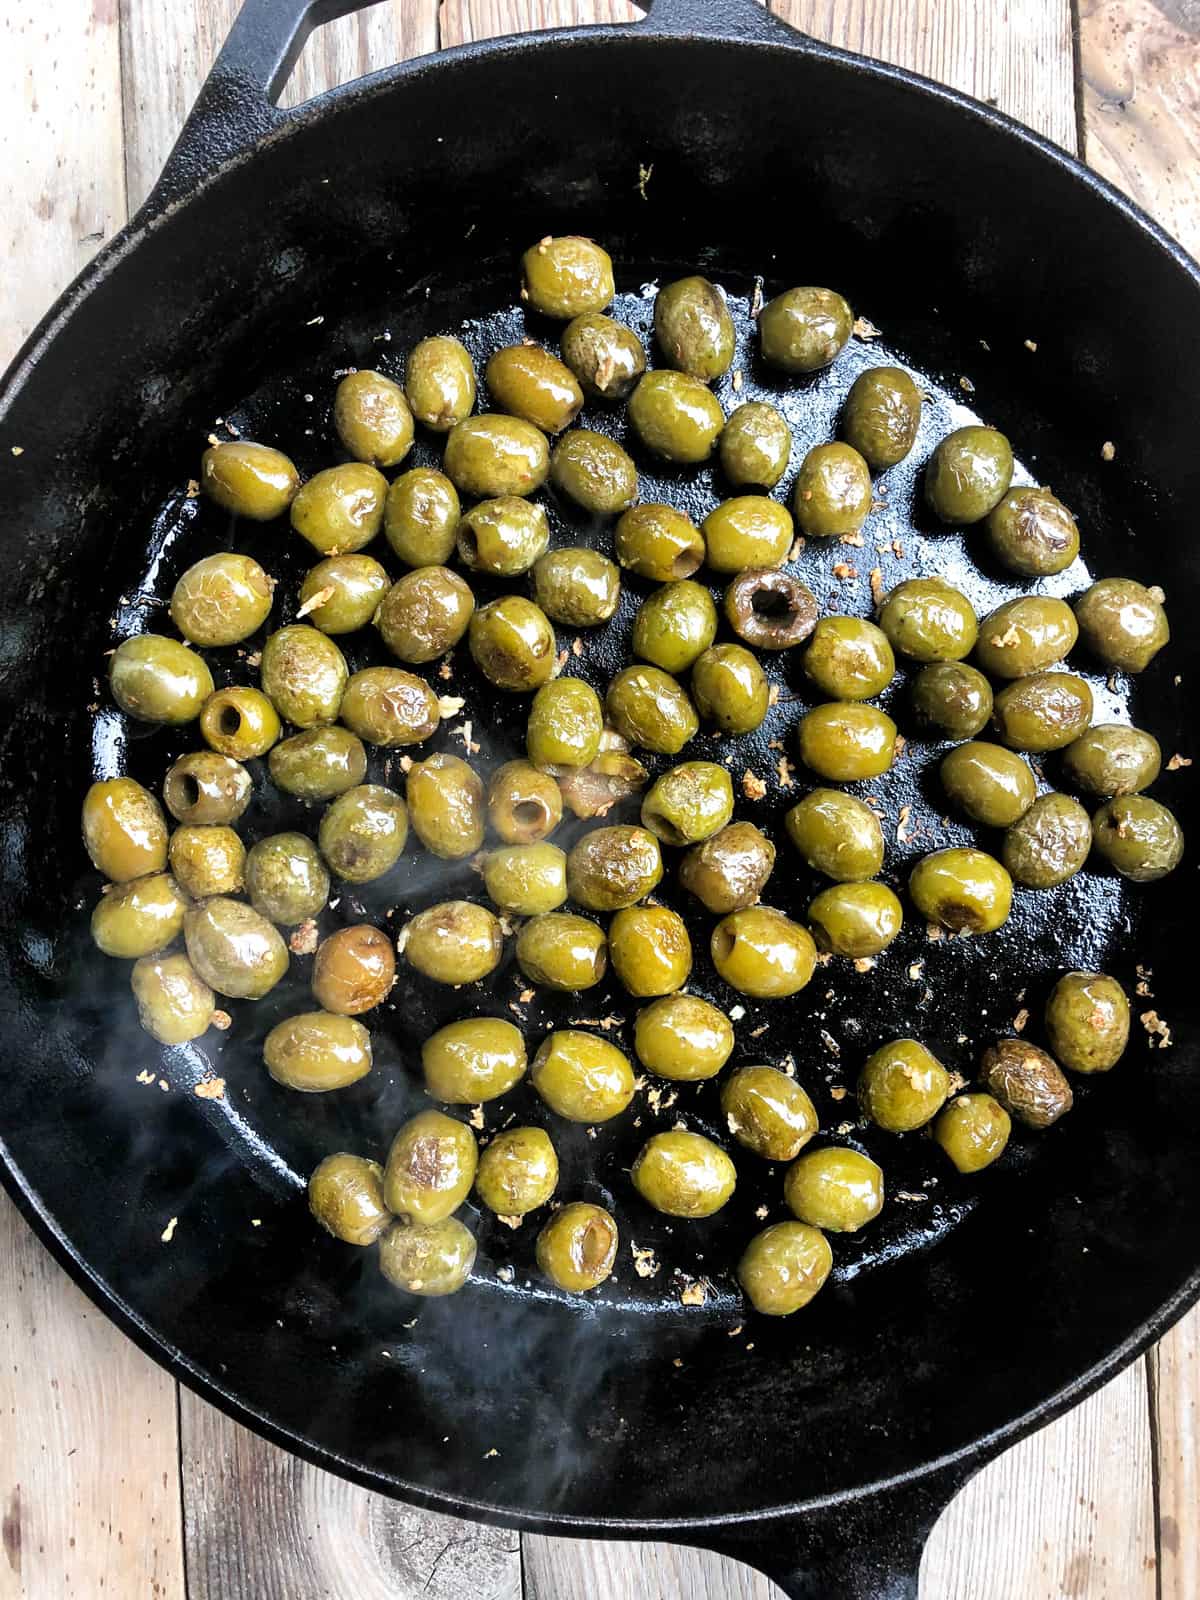 After 5 minutes, the olives should be heated and charred, causing the skins to blister a bit.